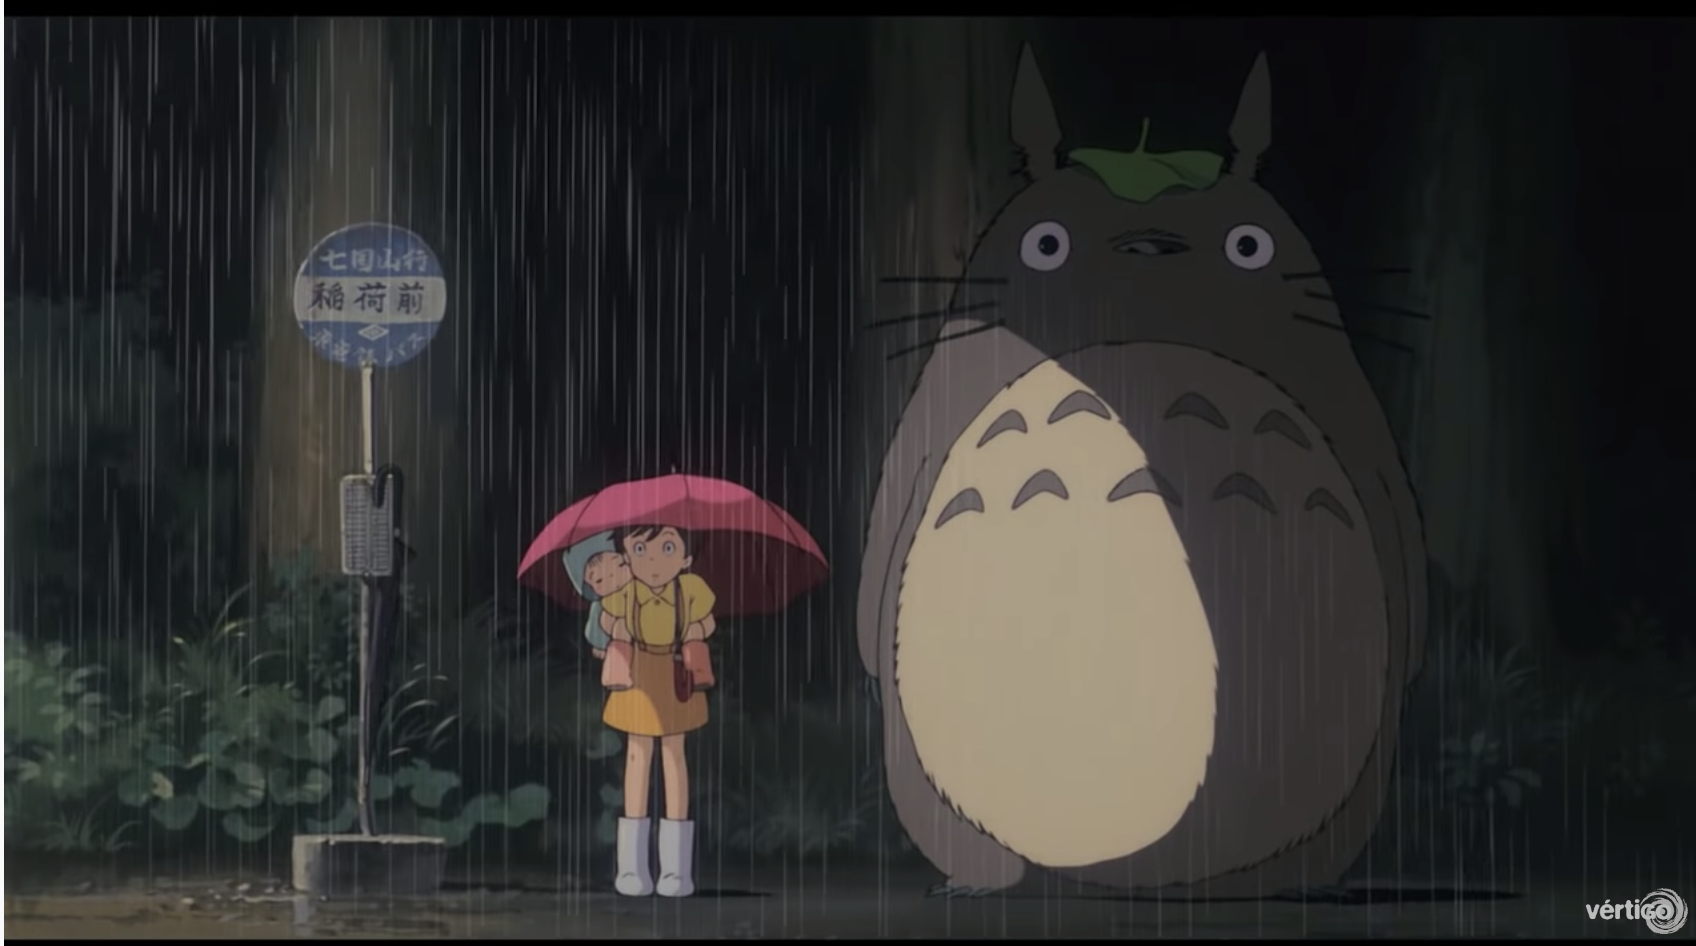 Iconic real-life Totoro bus stop in Japan was made by elderly ...